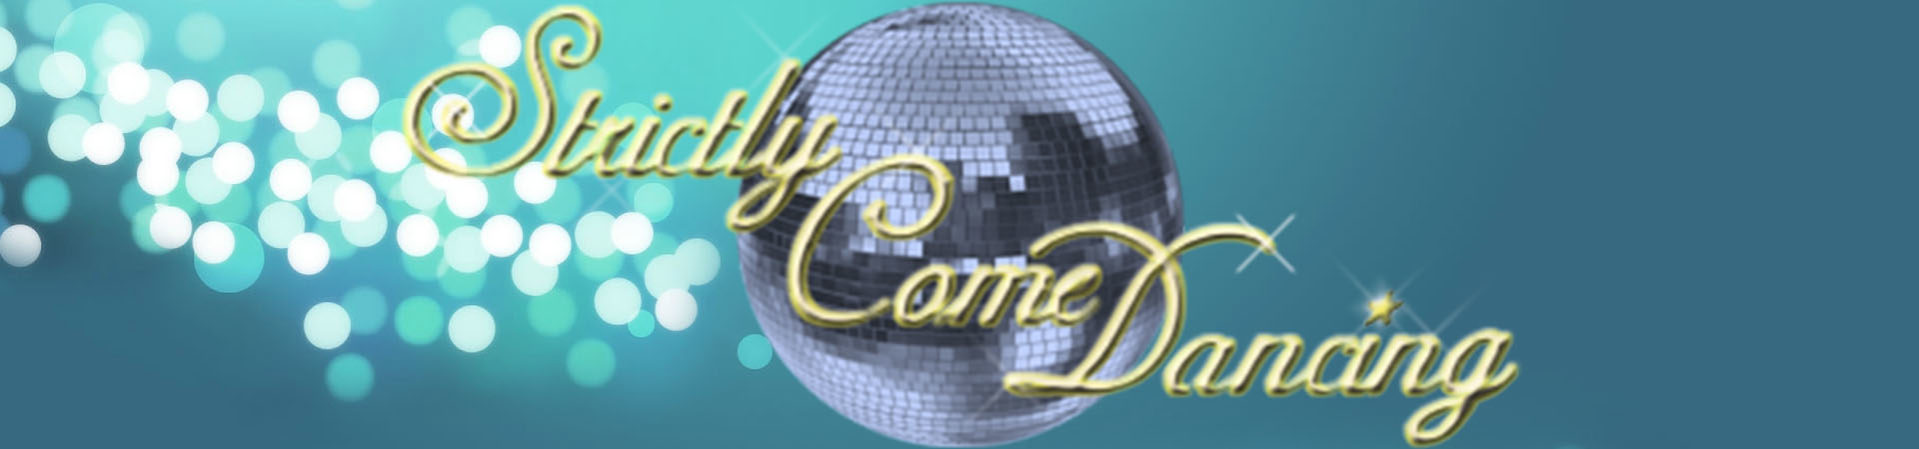 strictly-come-dancing-1920x450